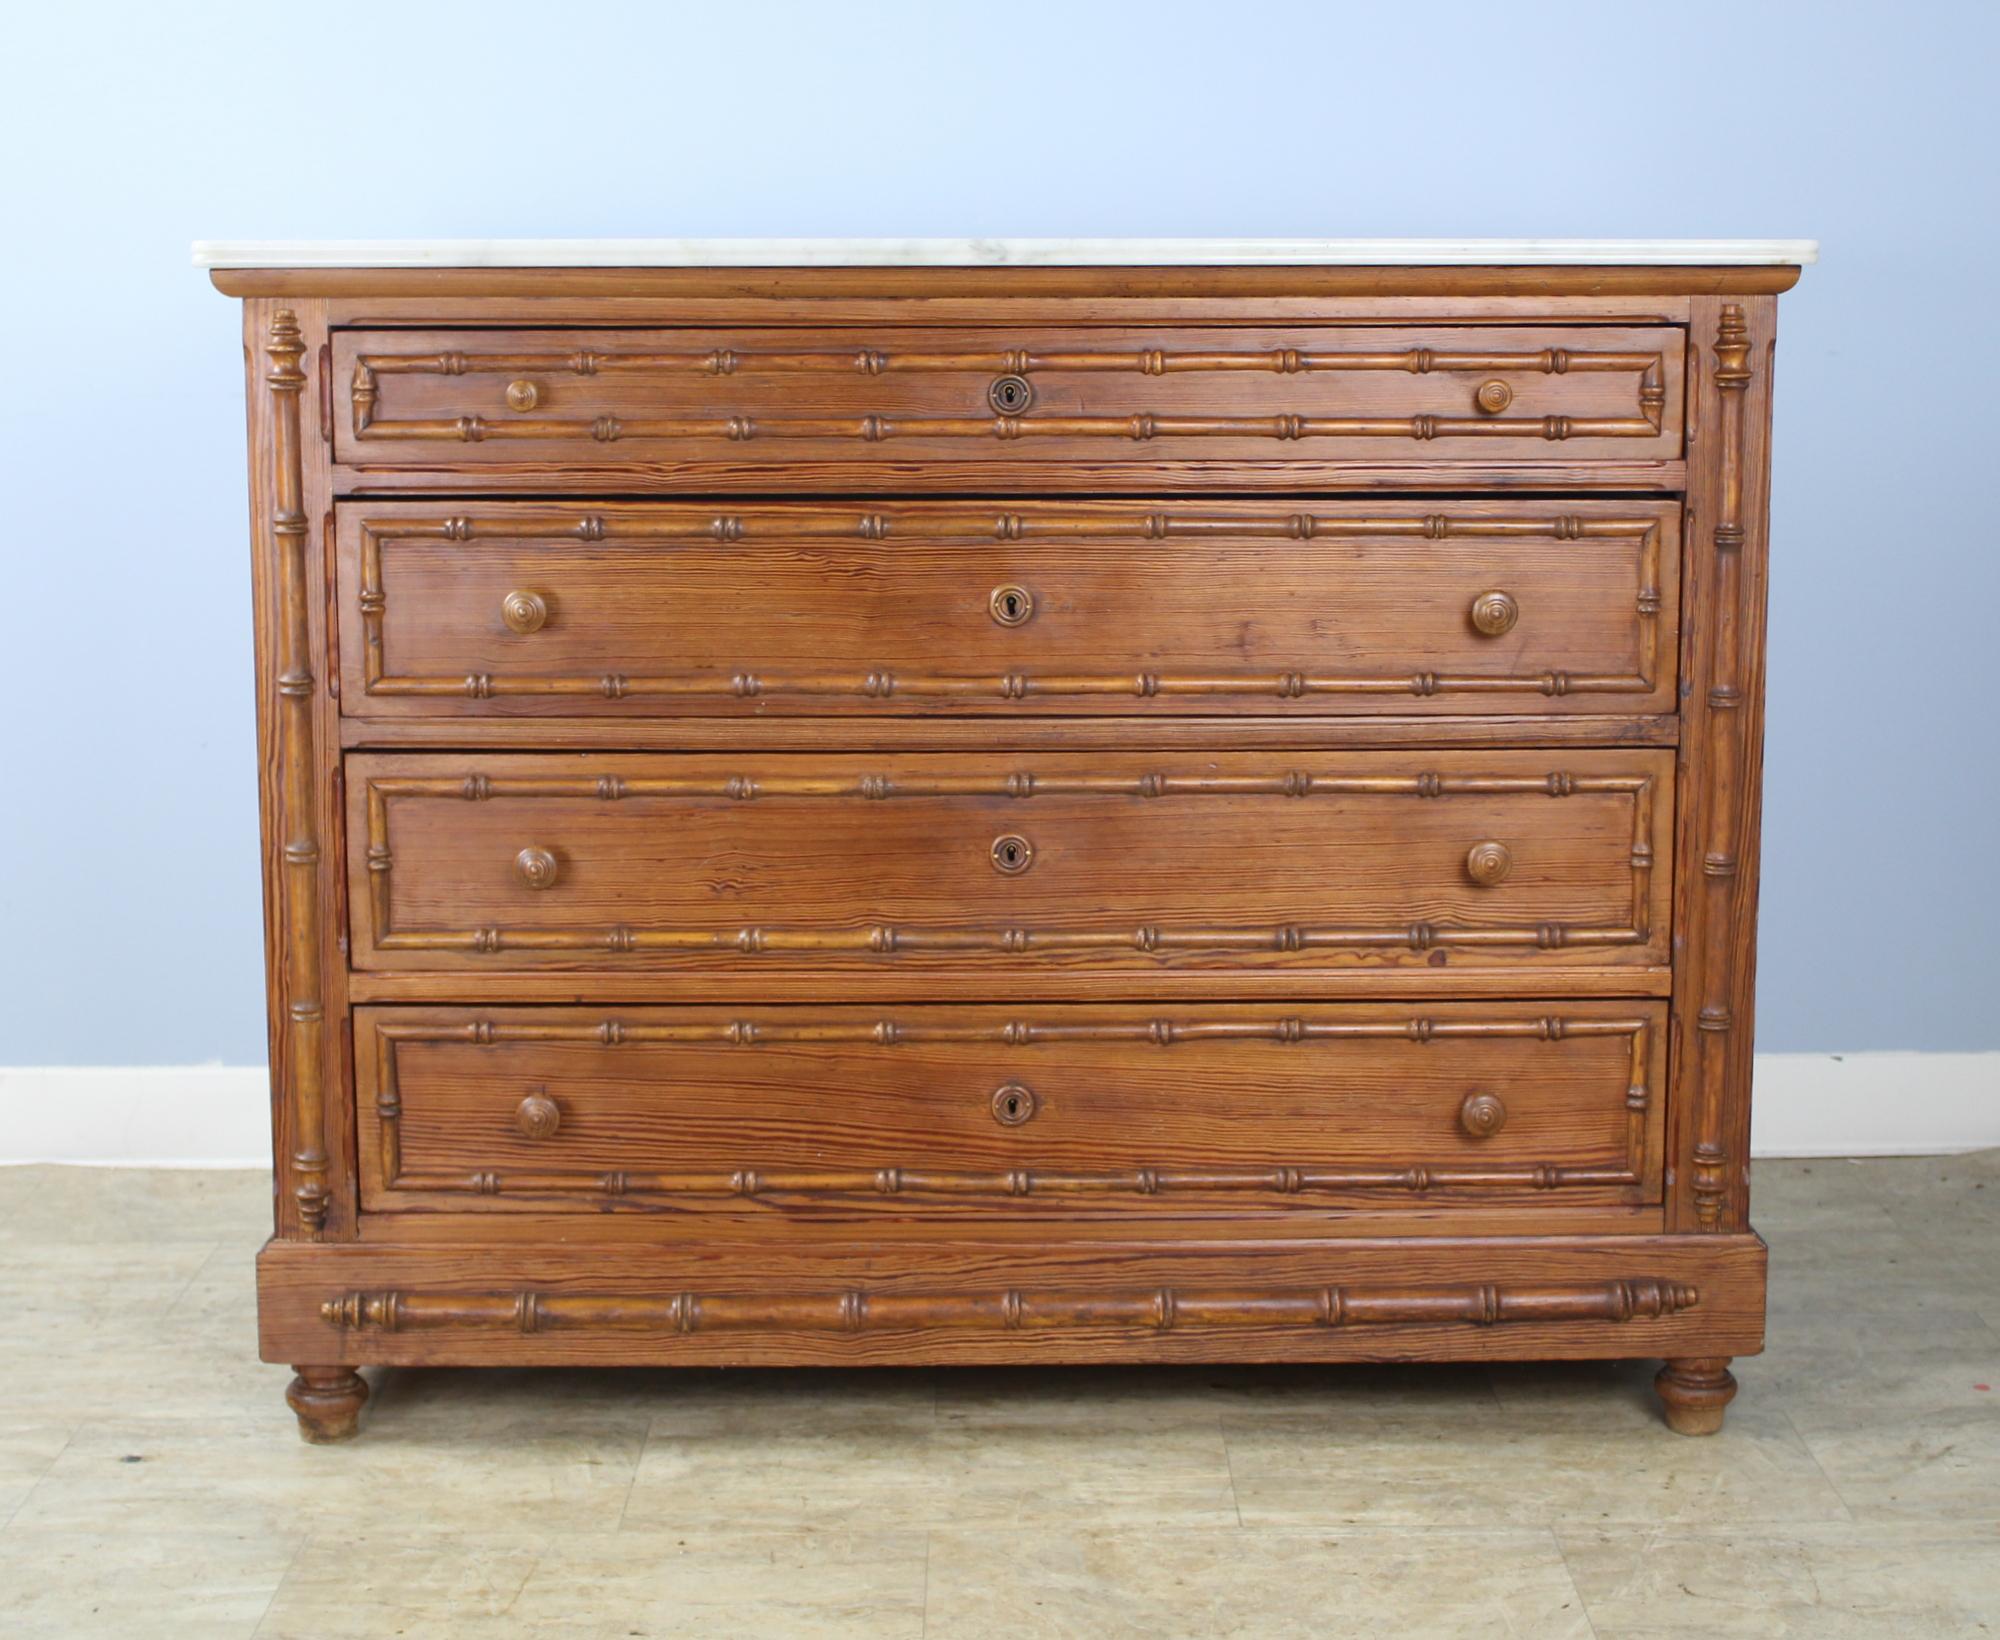 A charming large pine chest of drawers with faux bamboo columns and mouldings. Four roomy drawers. The interiors of the drawers have been painted so are clean. The marble which is original is in good antique condition, with the exception of some